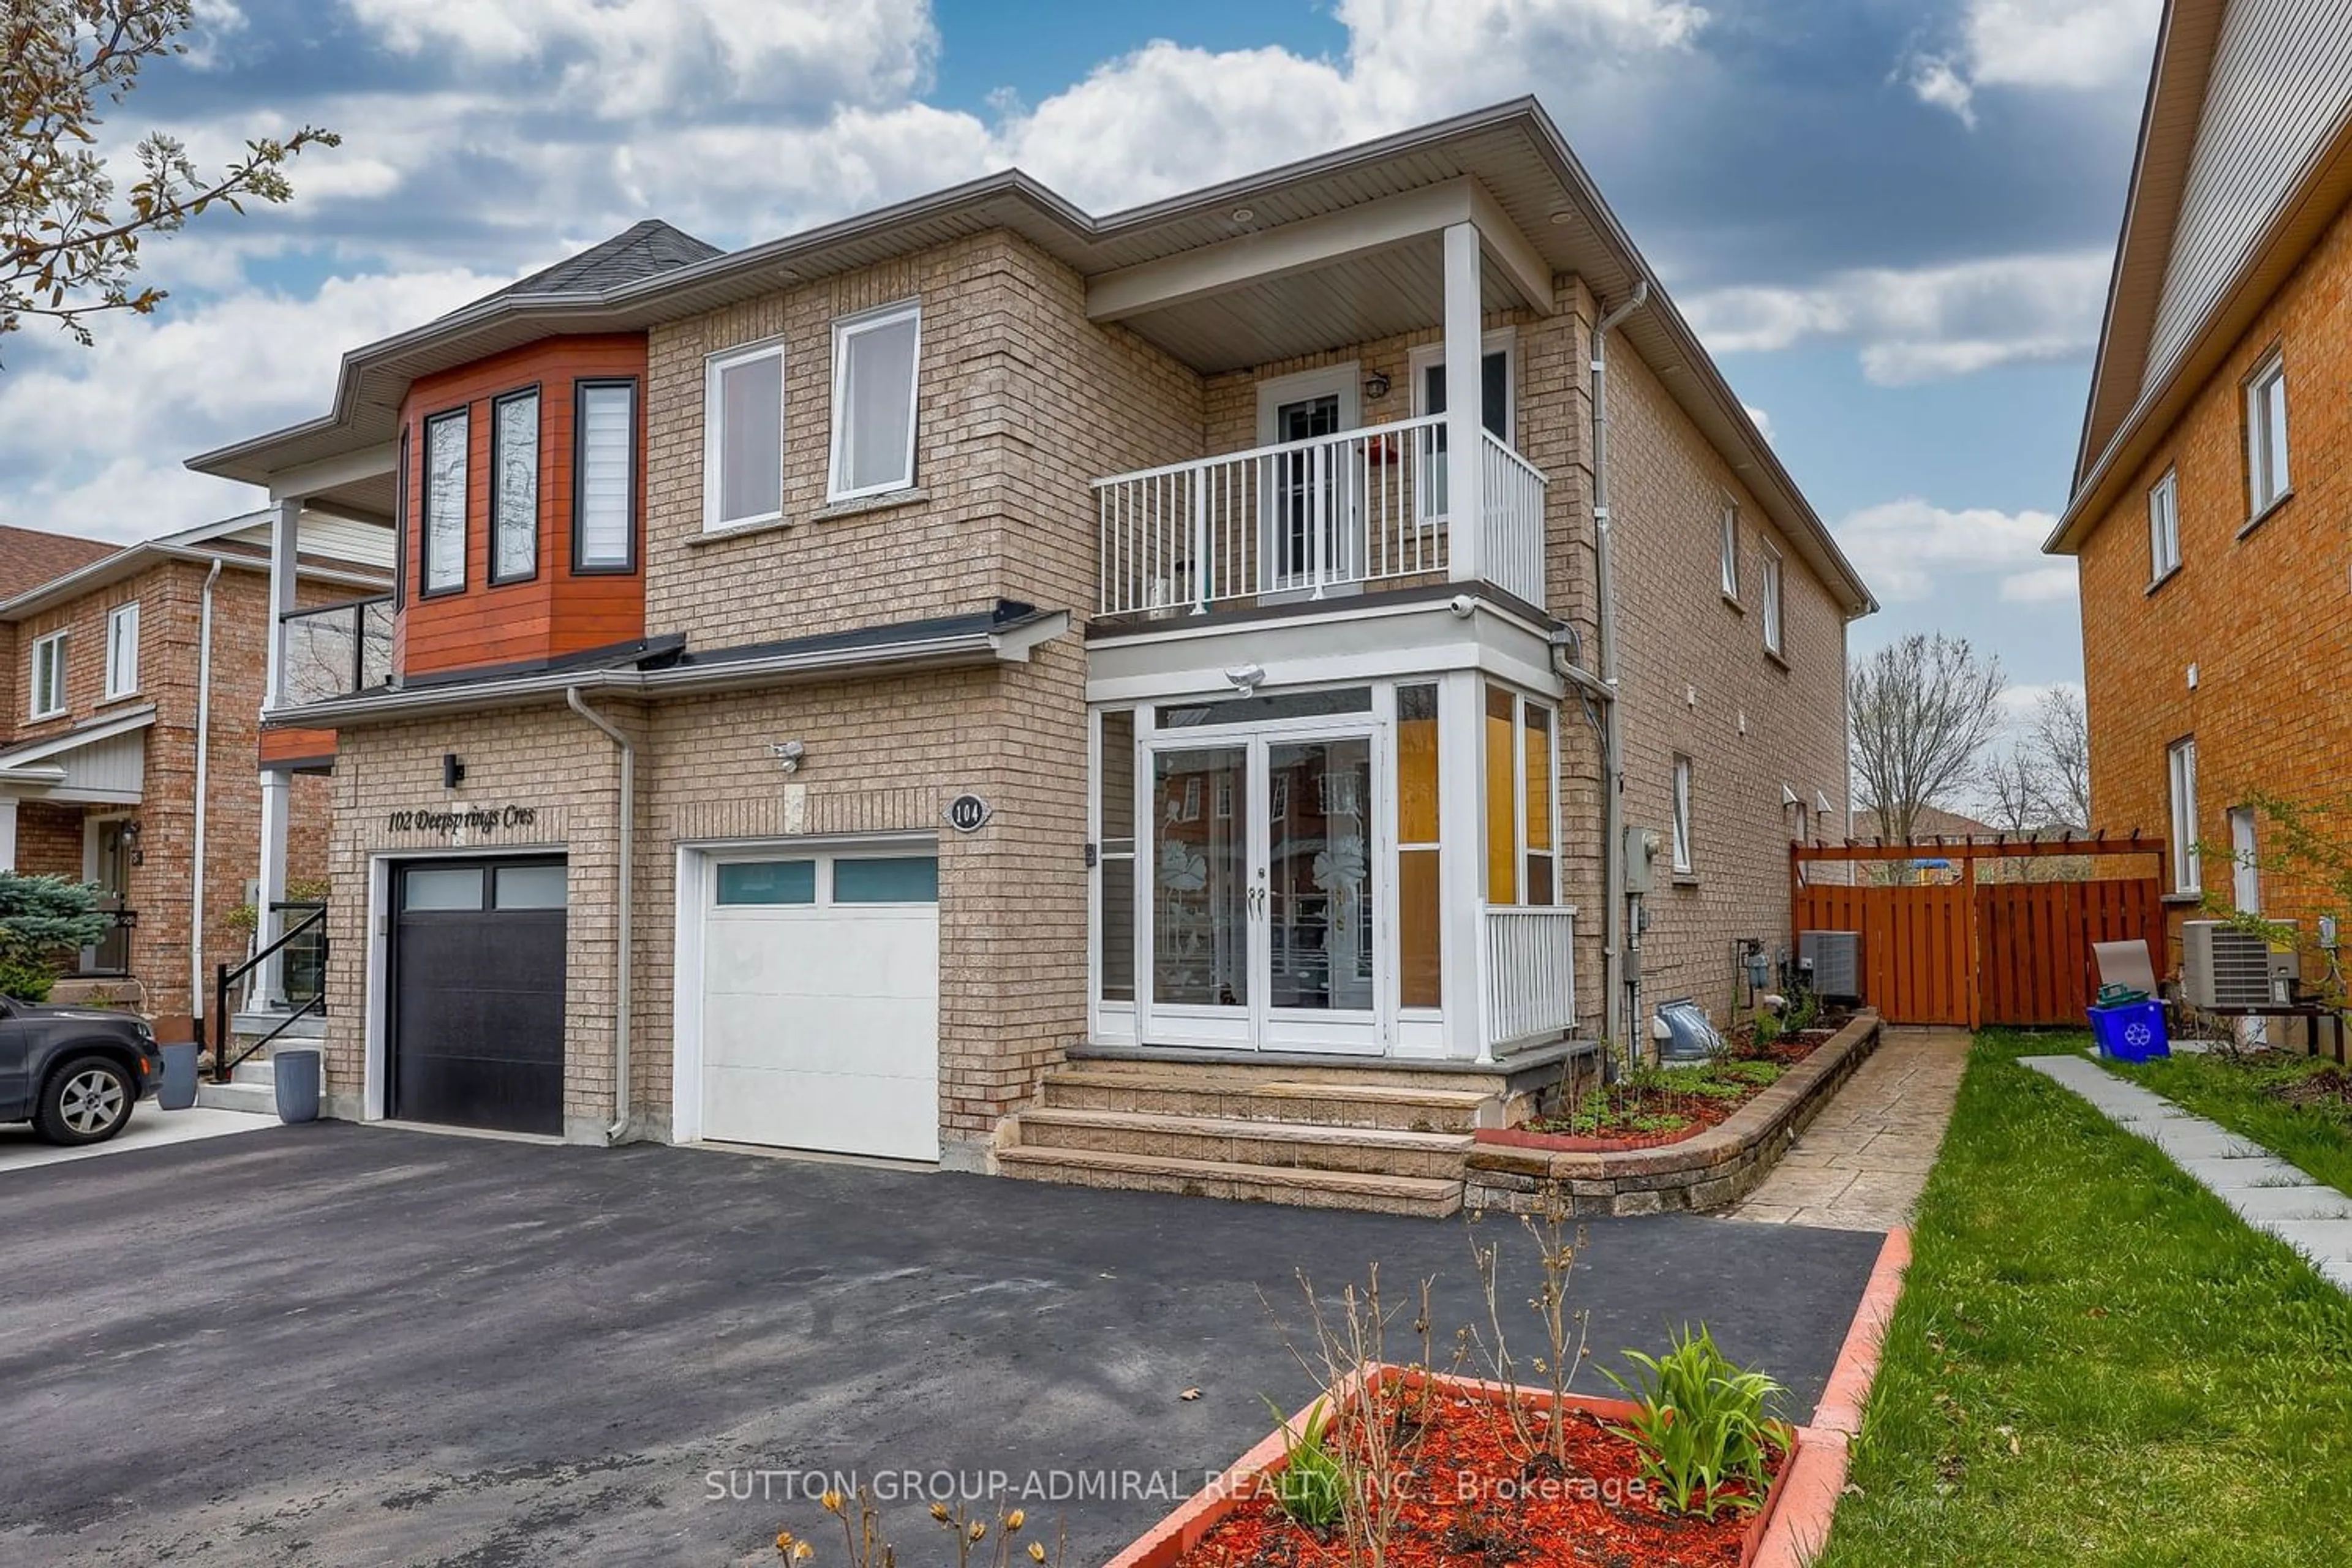 Home with brick exterior material for 104 Deepspring Cres, Vaughan Ontario L6A 3L8